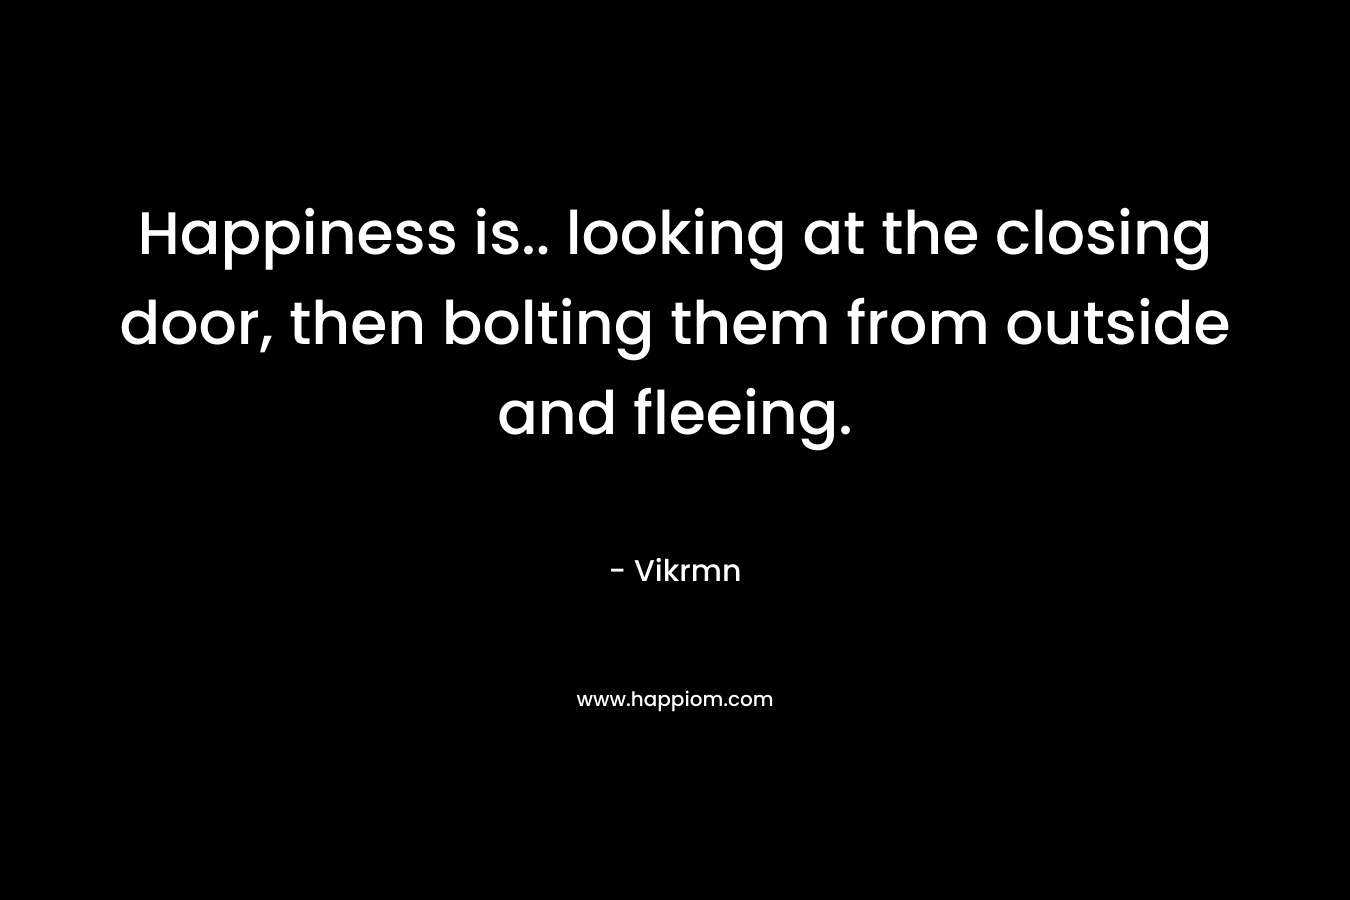 Happiness is.. looking at the closing door, then bolting them from outside and fleeing.